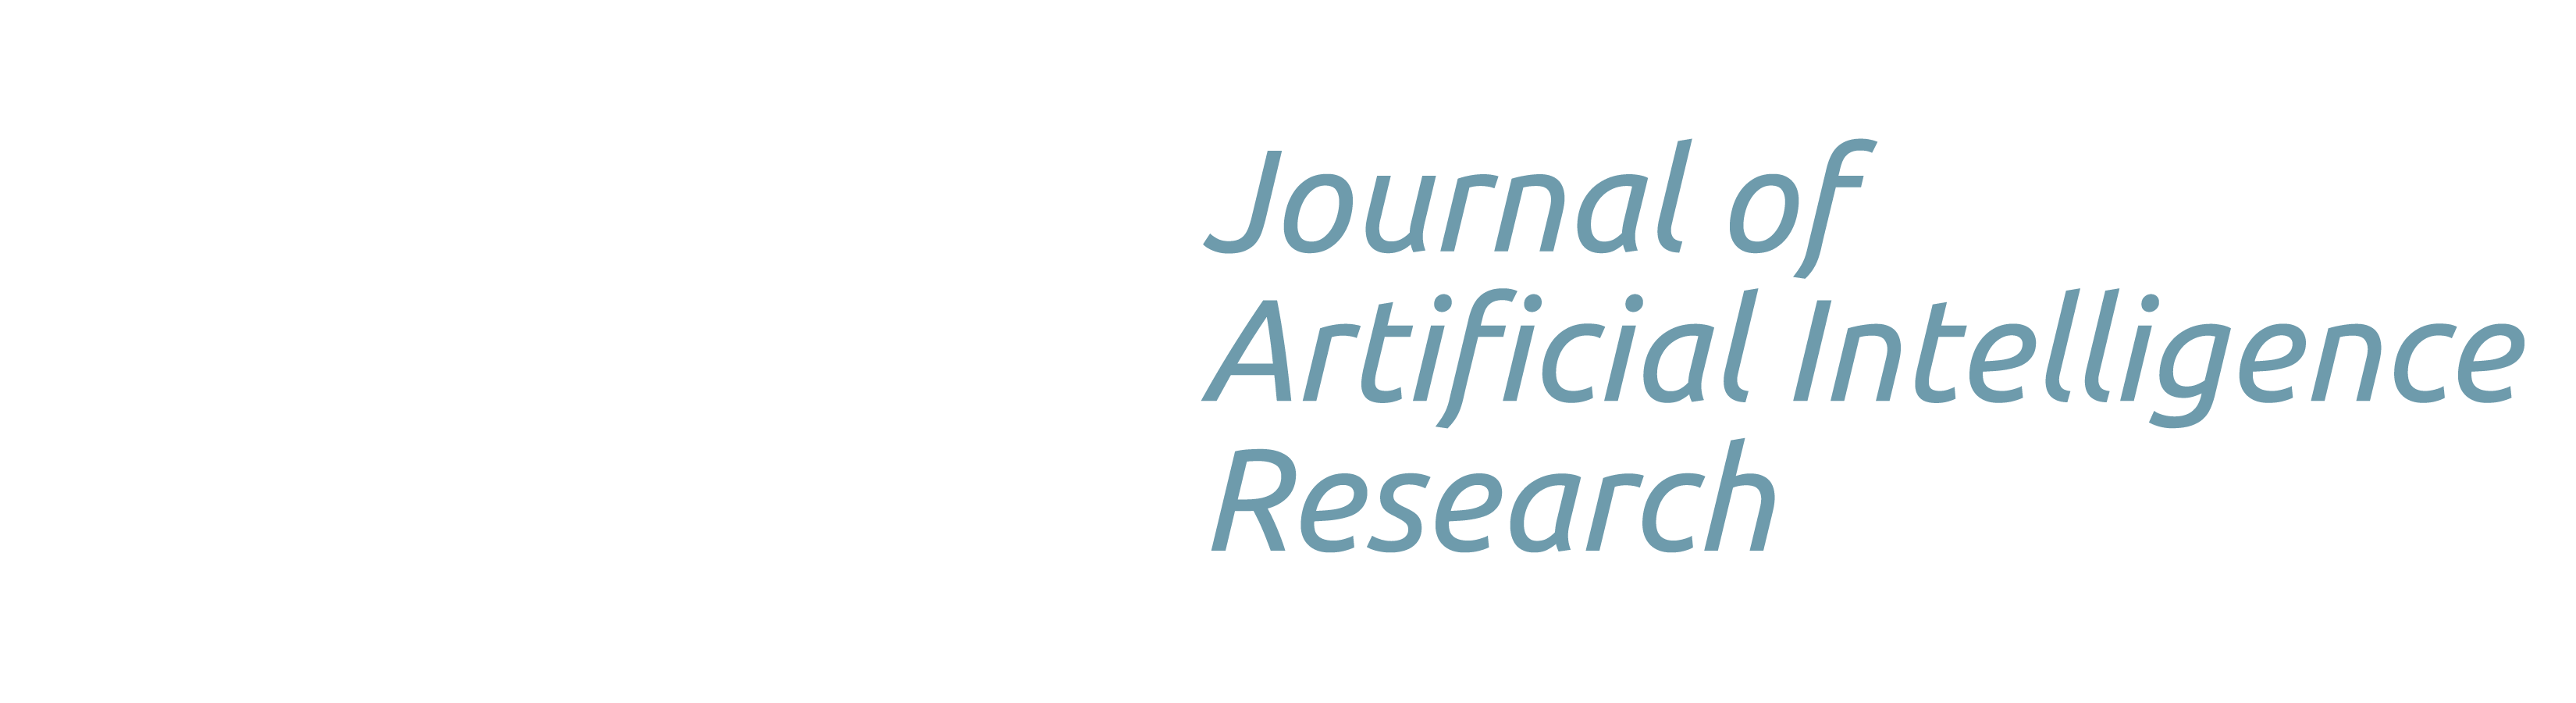 journal of artificial intelligence research review time